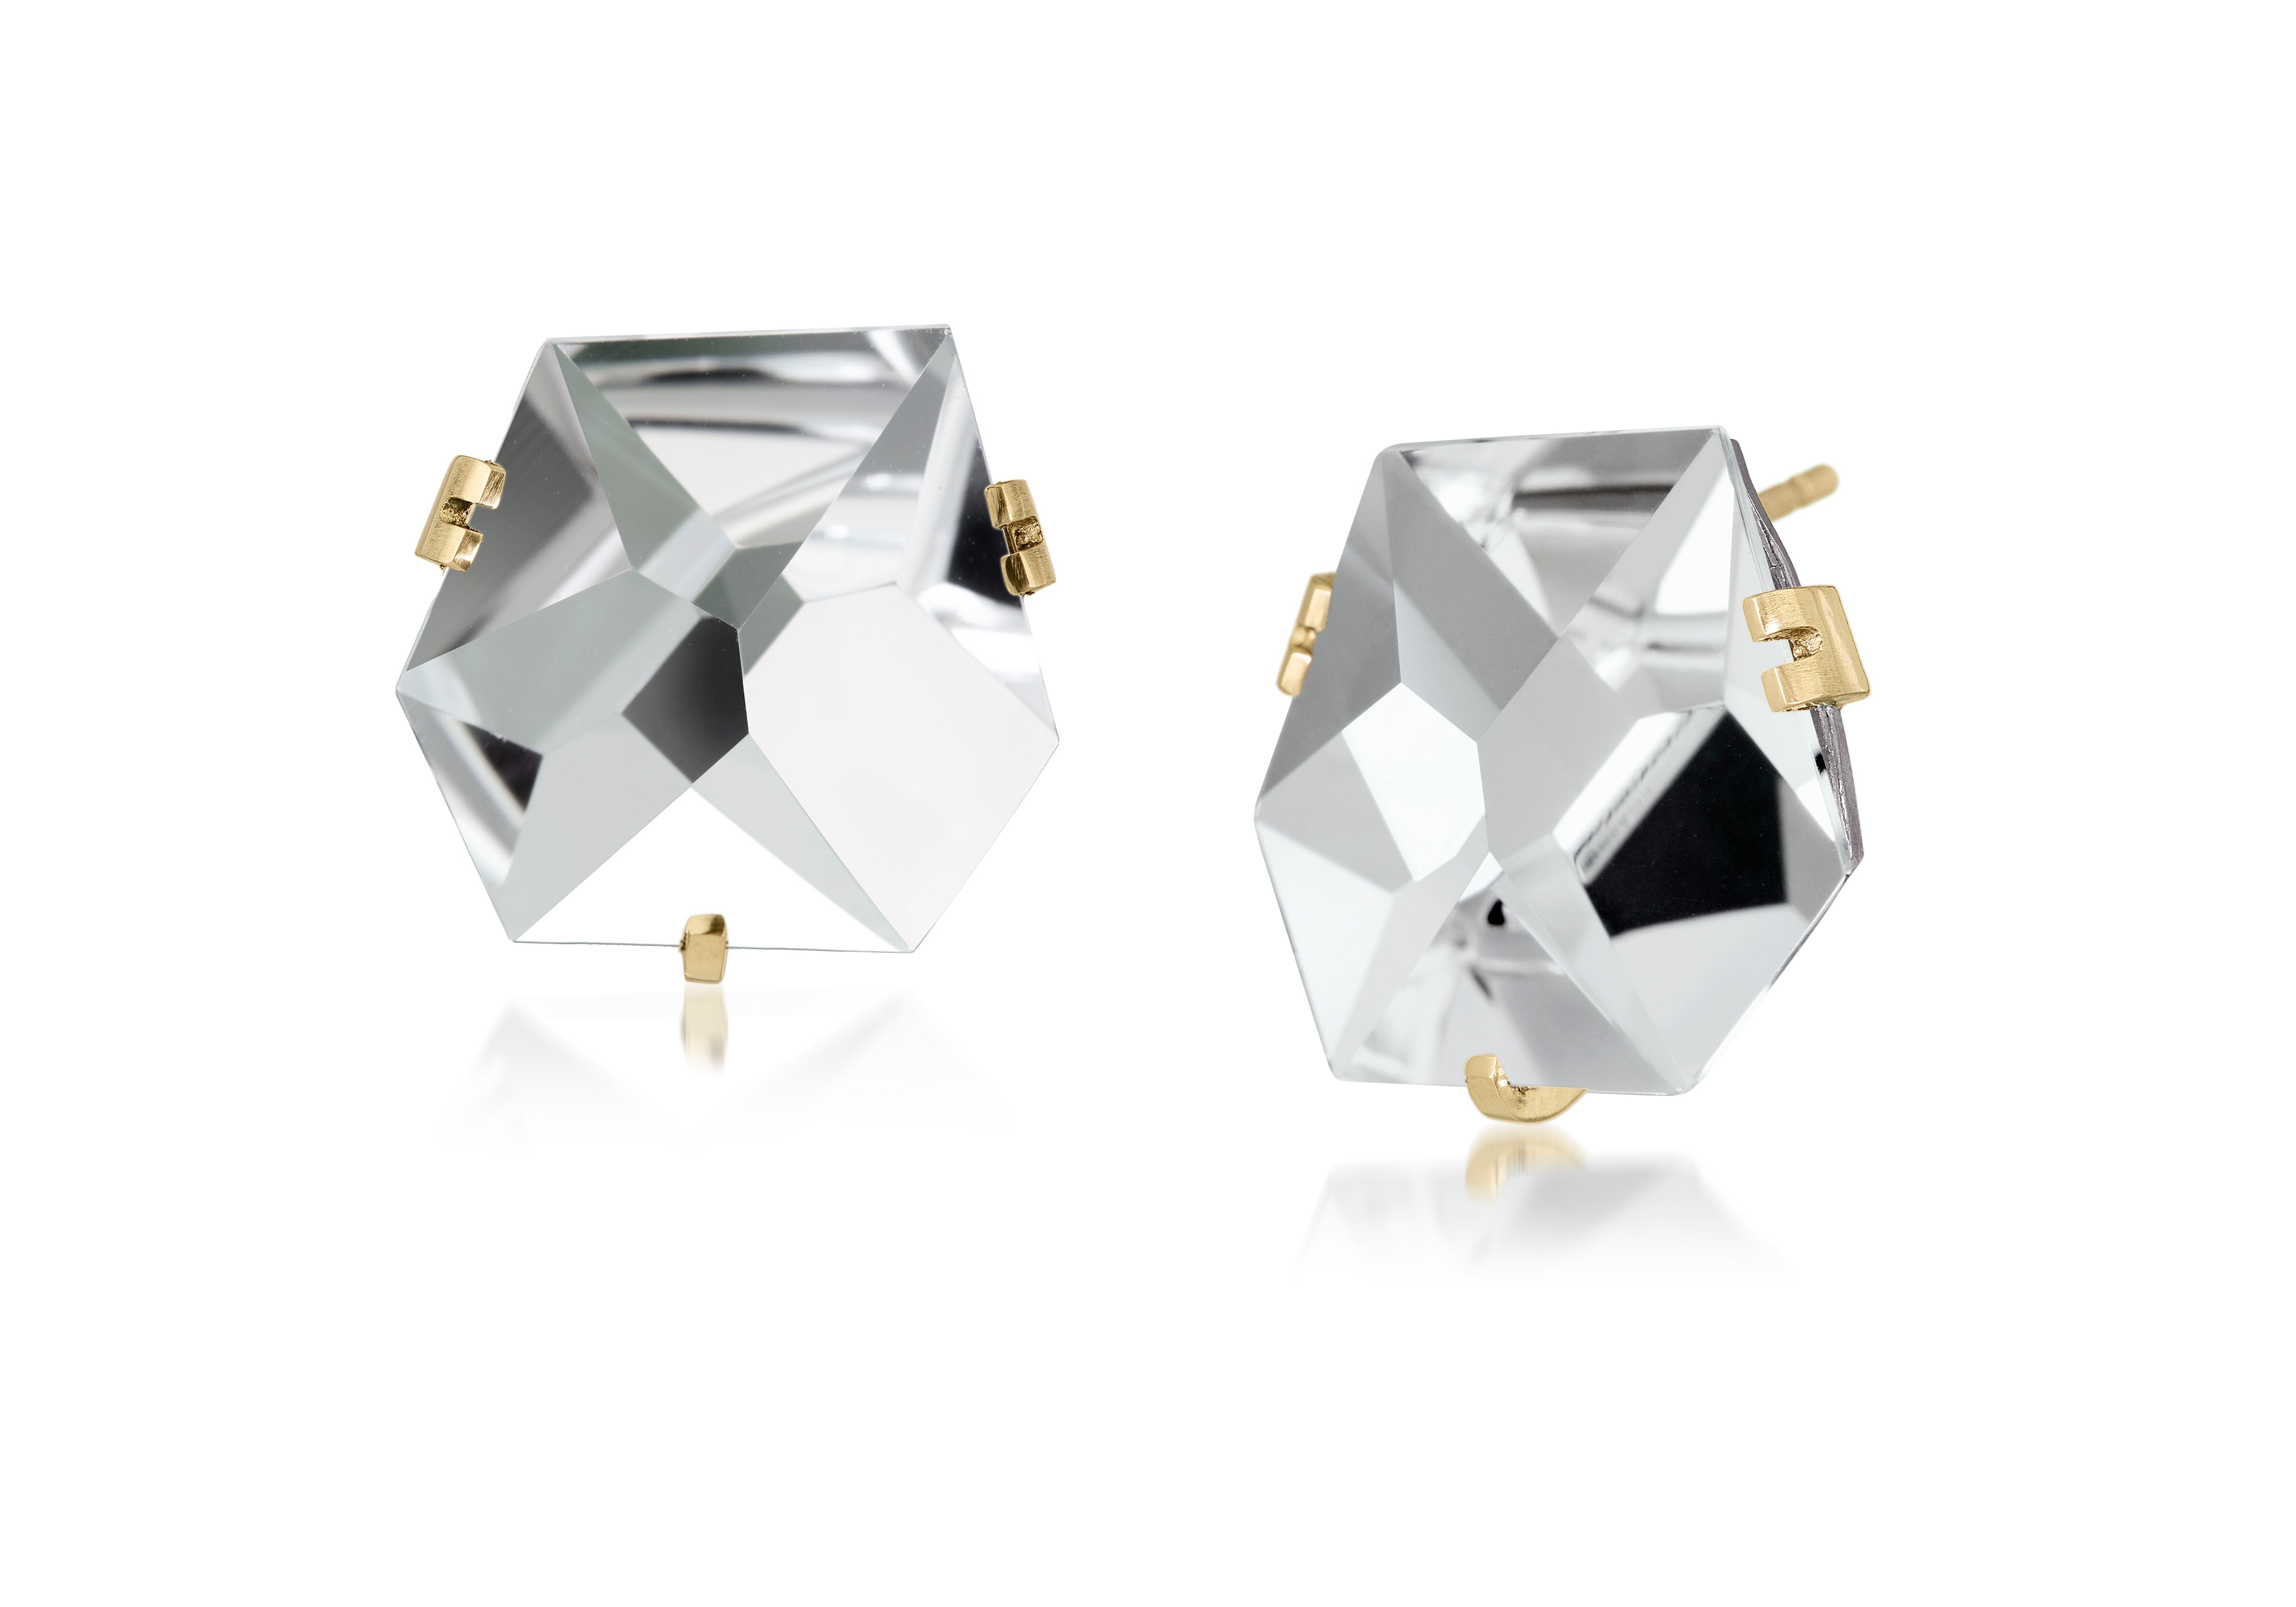 This medium Facet earring of natural gemstone is set in oxidized sterling and 18k gold. Unique, hand cut faceted chunks of natural gem are prong set in 18k prongs with 14k posts and large backings. 25.0+ tcw.